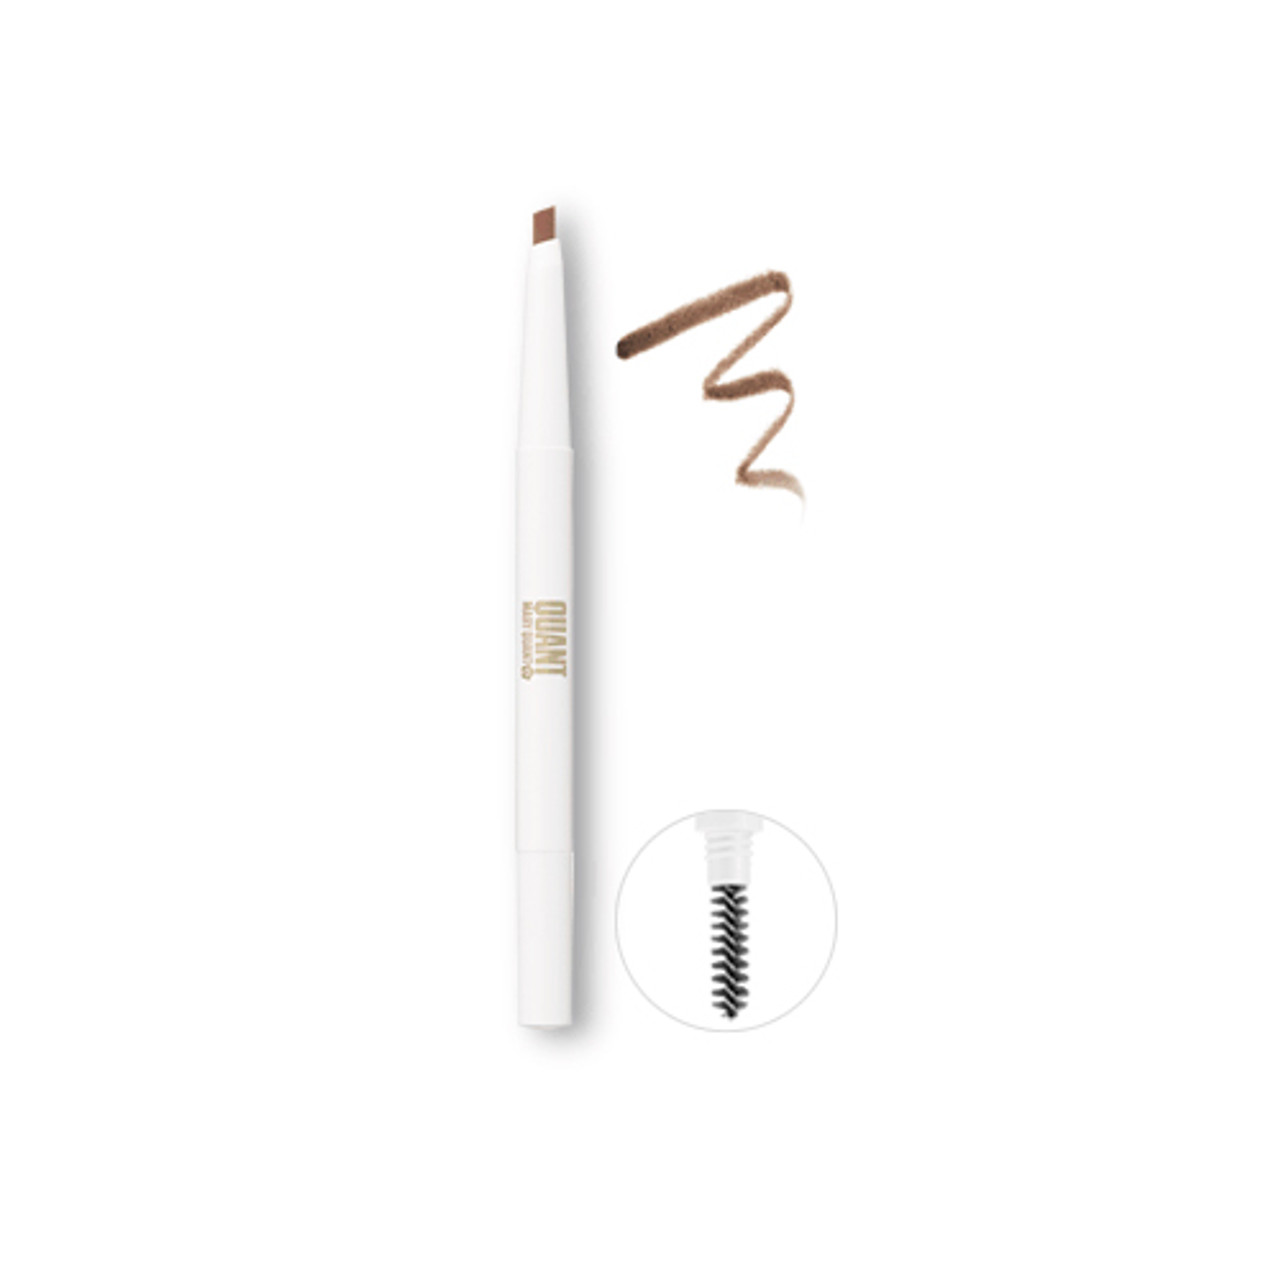 A white brow pencil with Quant by Mary Quant printed on the side. The tip is brown, and there is a swatch of the medium brown shade to the right of the product. There is also a close up on the spoolie at the end of the product. This extendable, oval-tipped brow pencil is kind to skin, adheres well and is able to create excellent brow definition with ease.